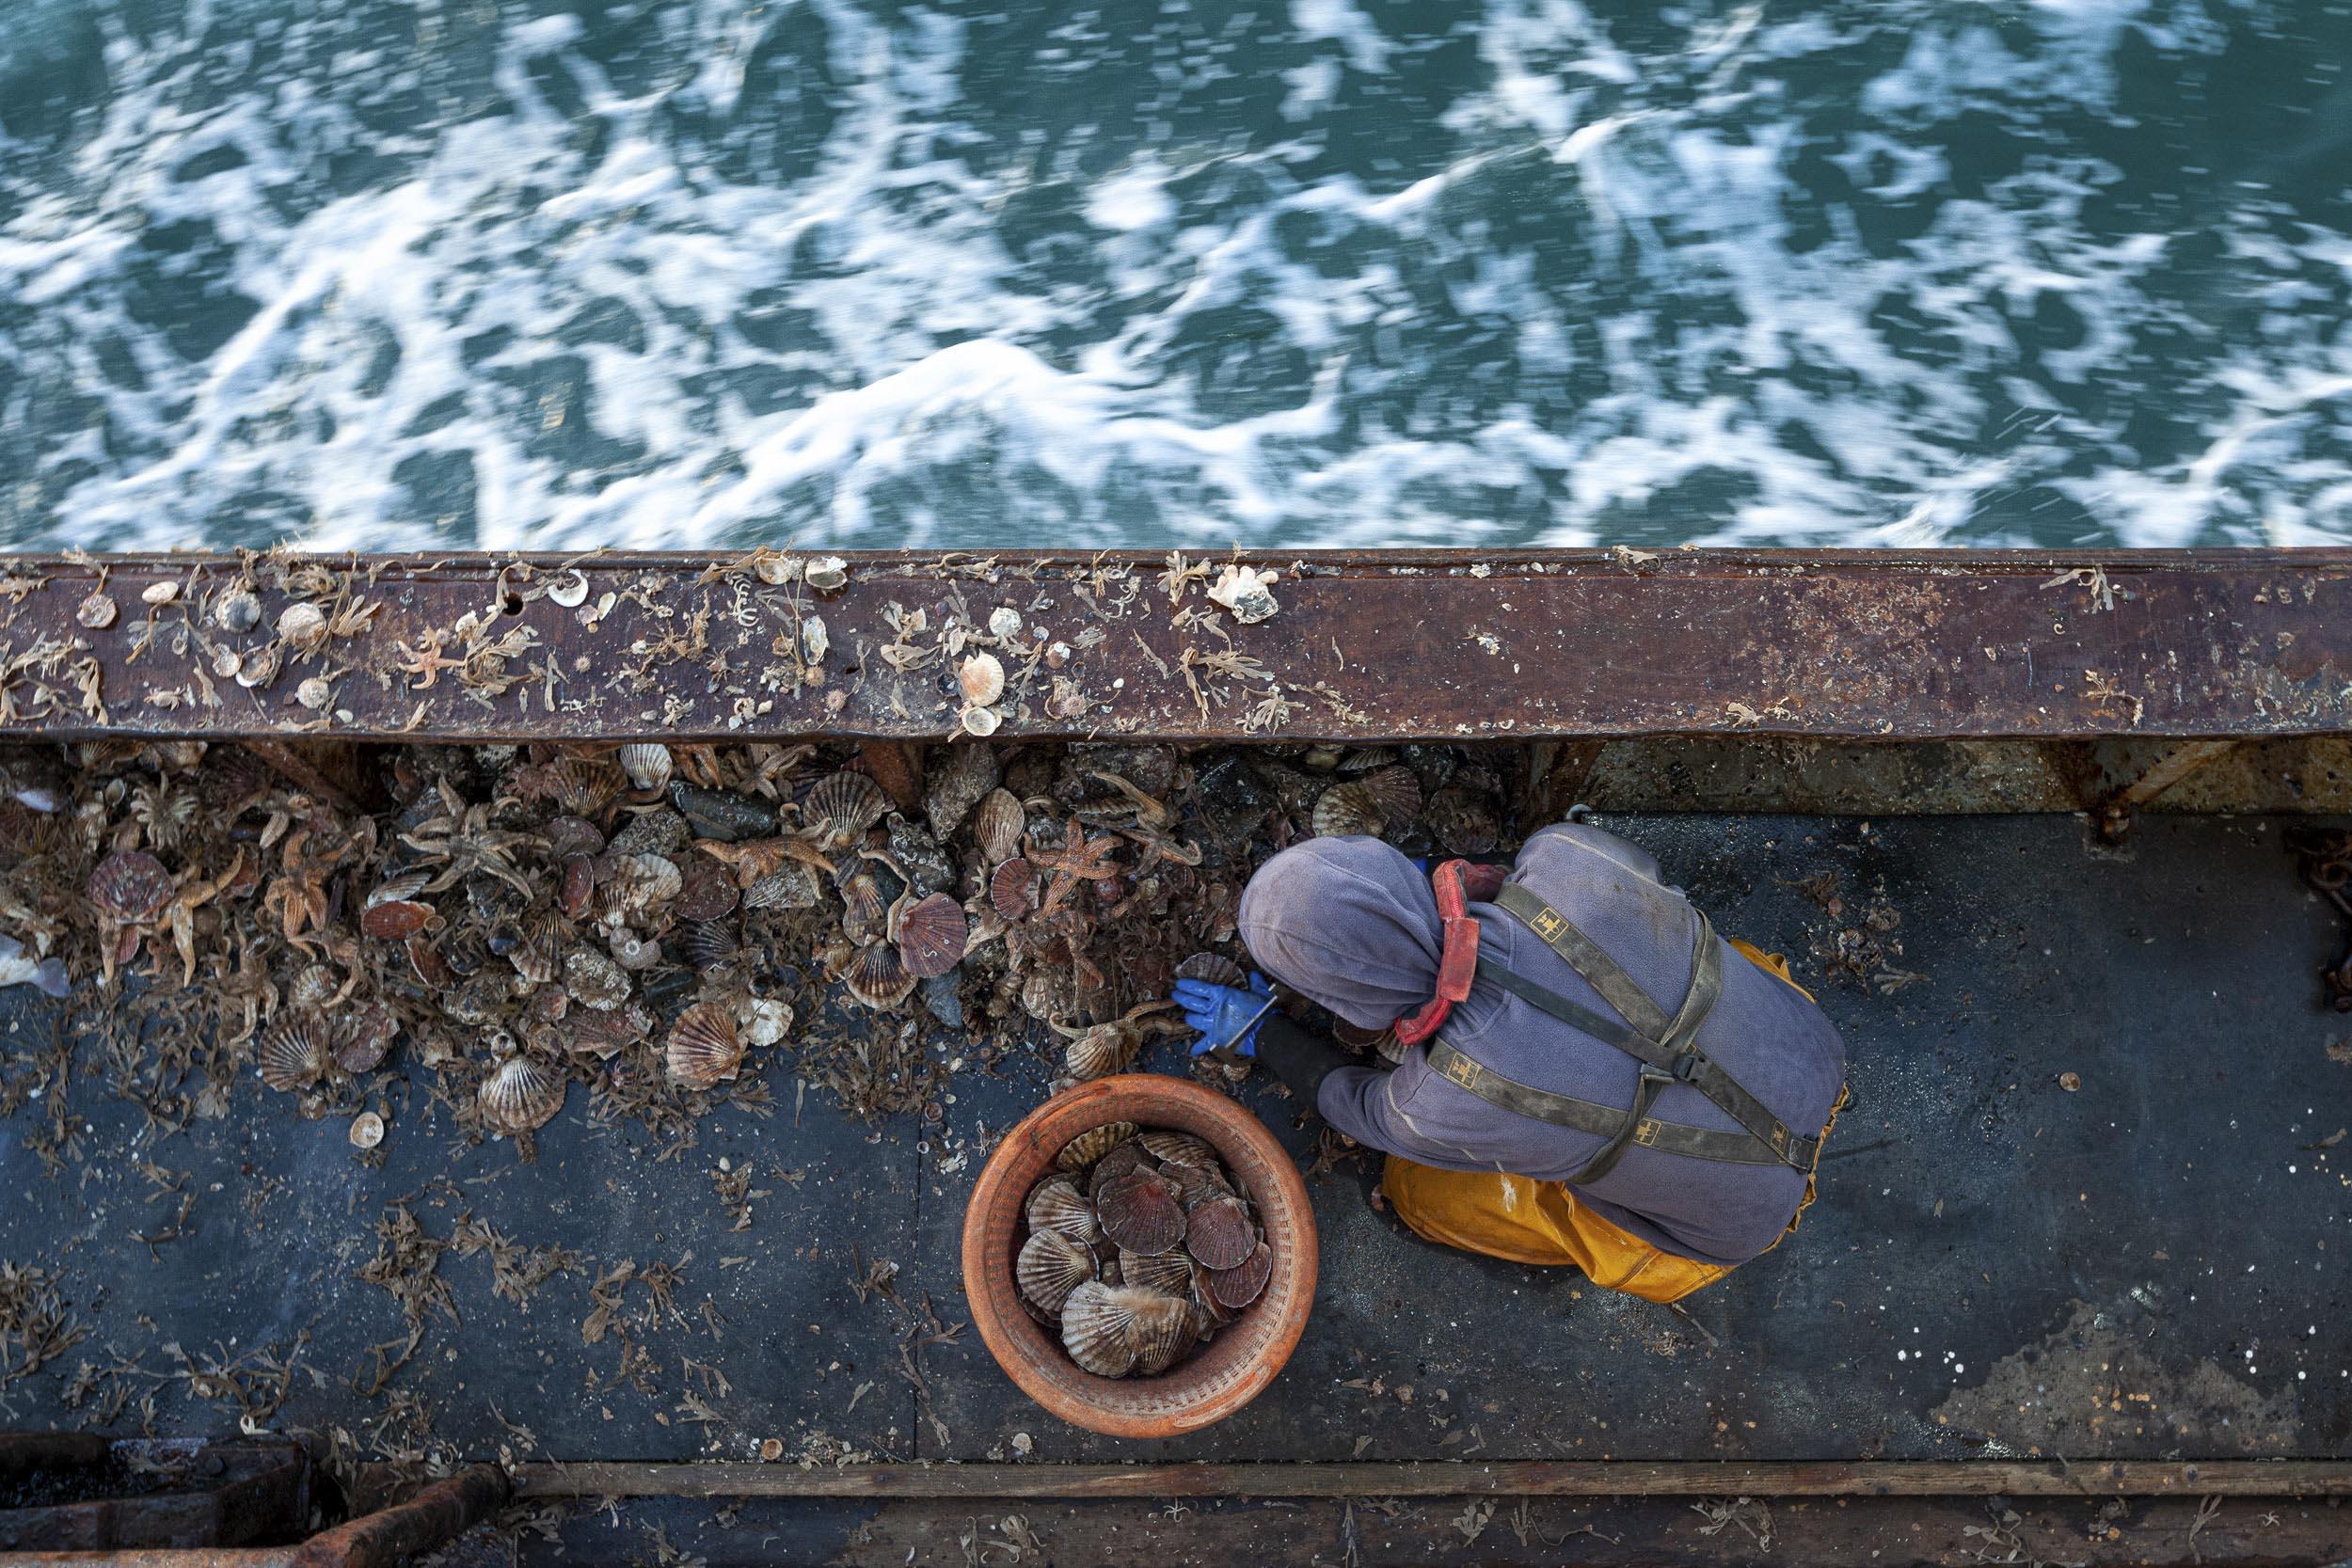 A person is sorting scallops into a bucket on a fishing boat.